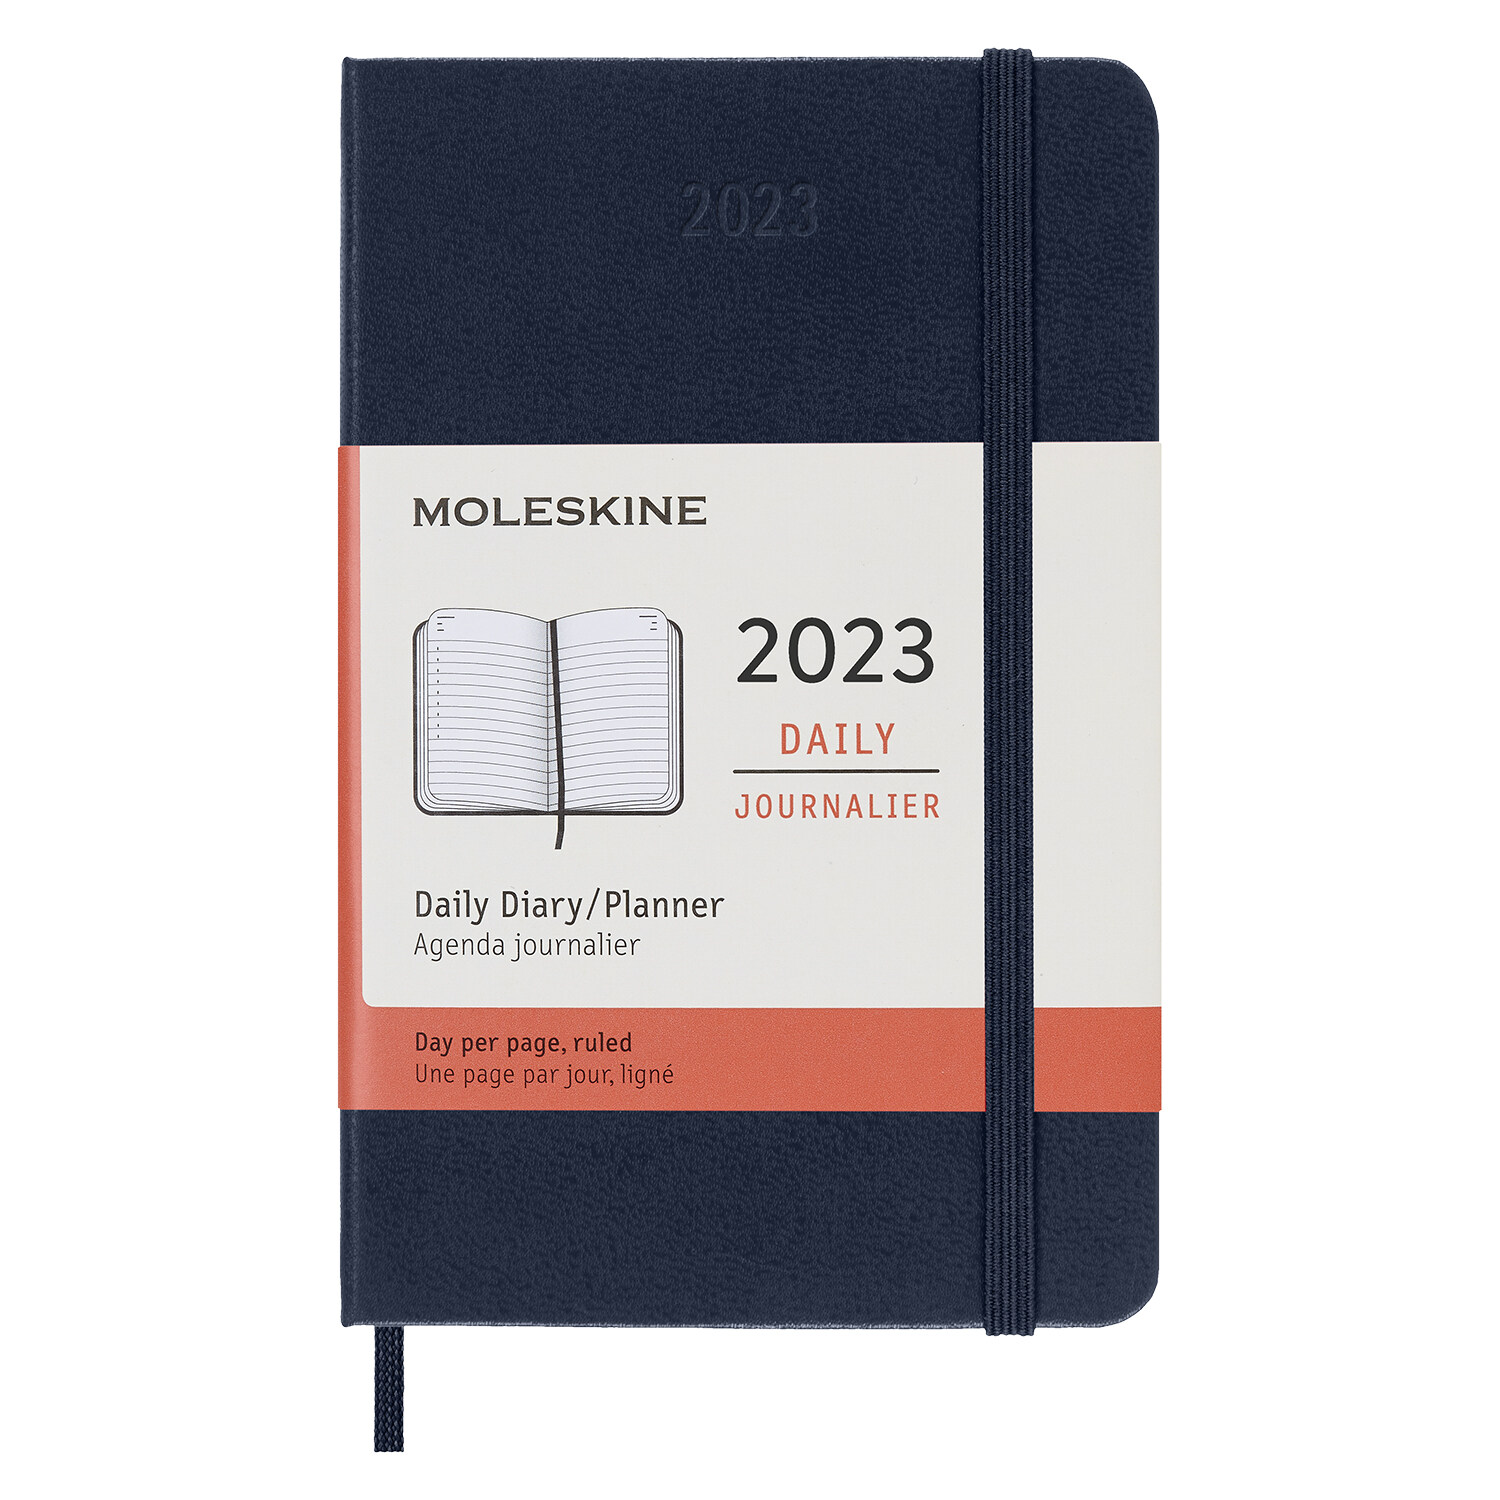 Moleskine 2023 Daily Planner, 12m, Pocket, Saphire Blue, Hard Cover (3.5 X 5.5) (Other)